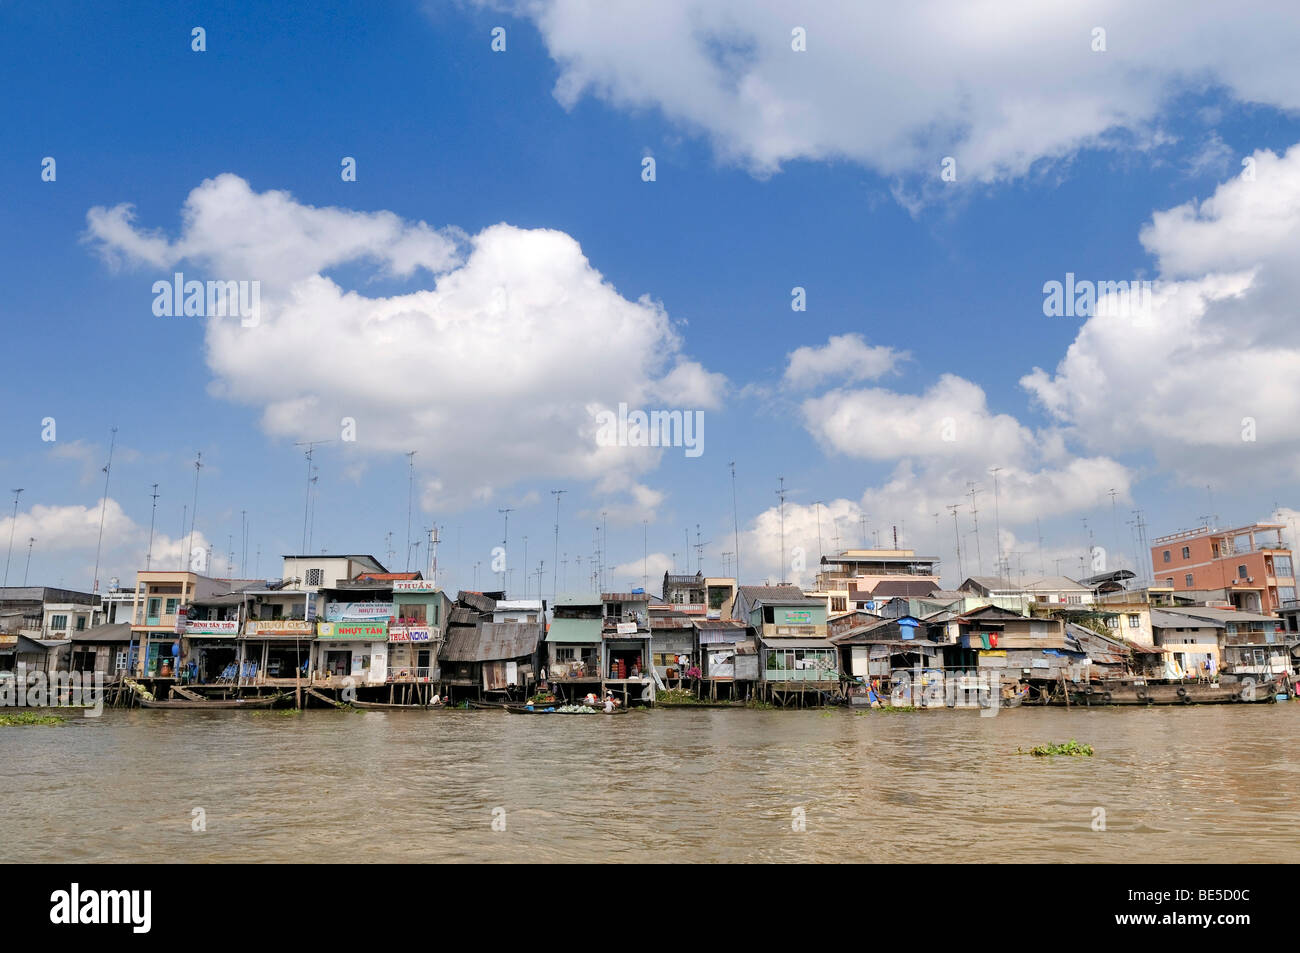 Residential dwellings and shops with numerous TV antennas on the roofs on the banks of the Mekong River, Mekong Delta, Vietnam, Stock Photo